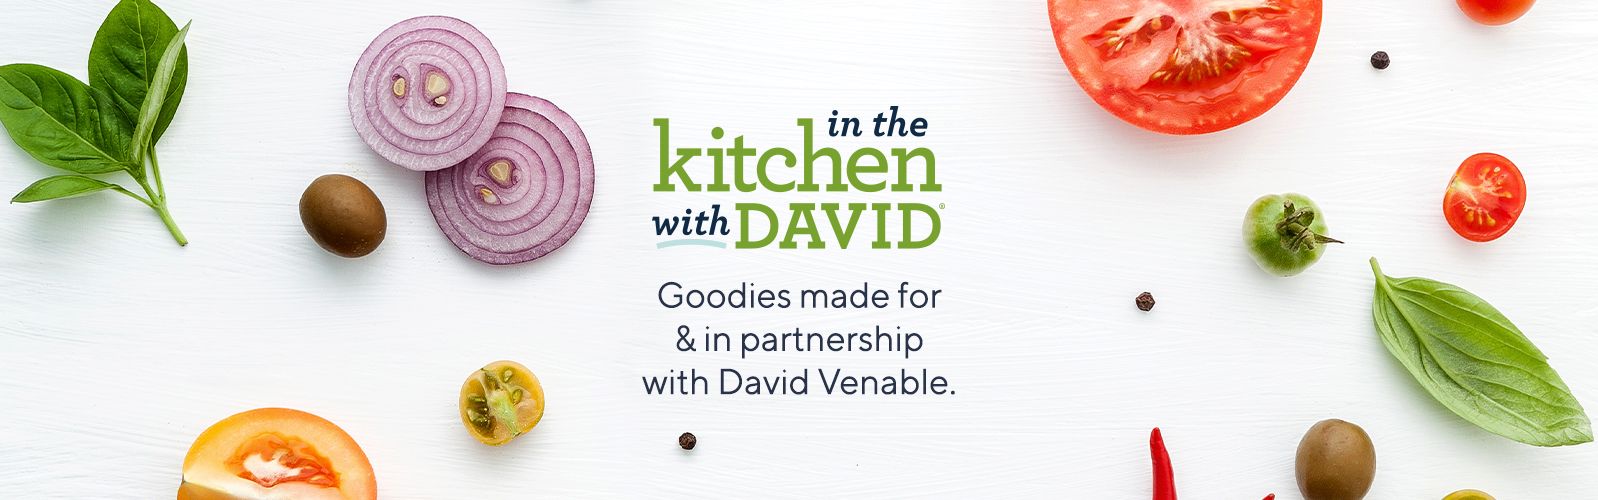 In The Kitchen with David Merchandise — QVC.com